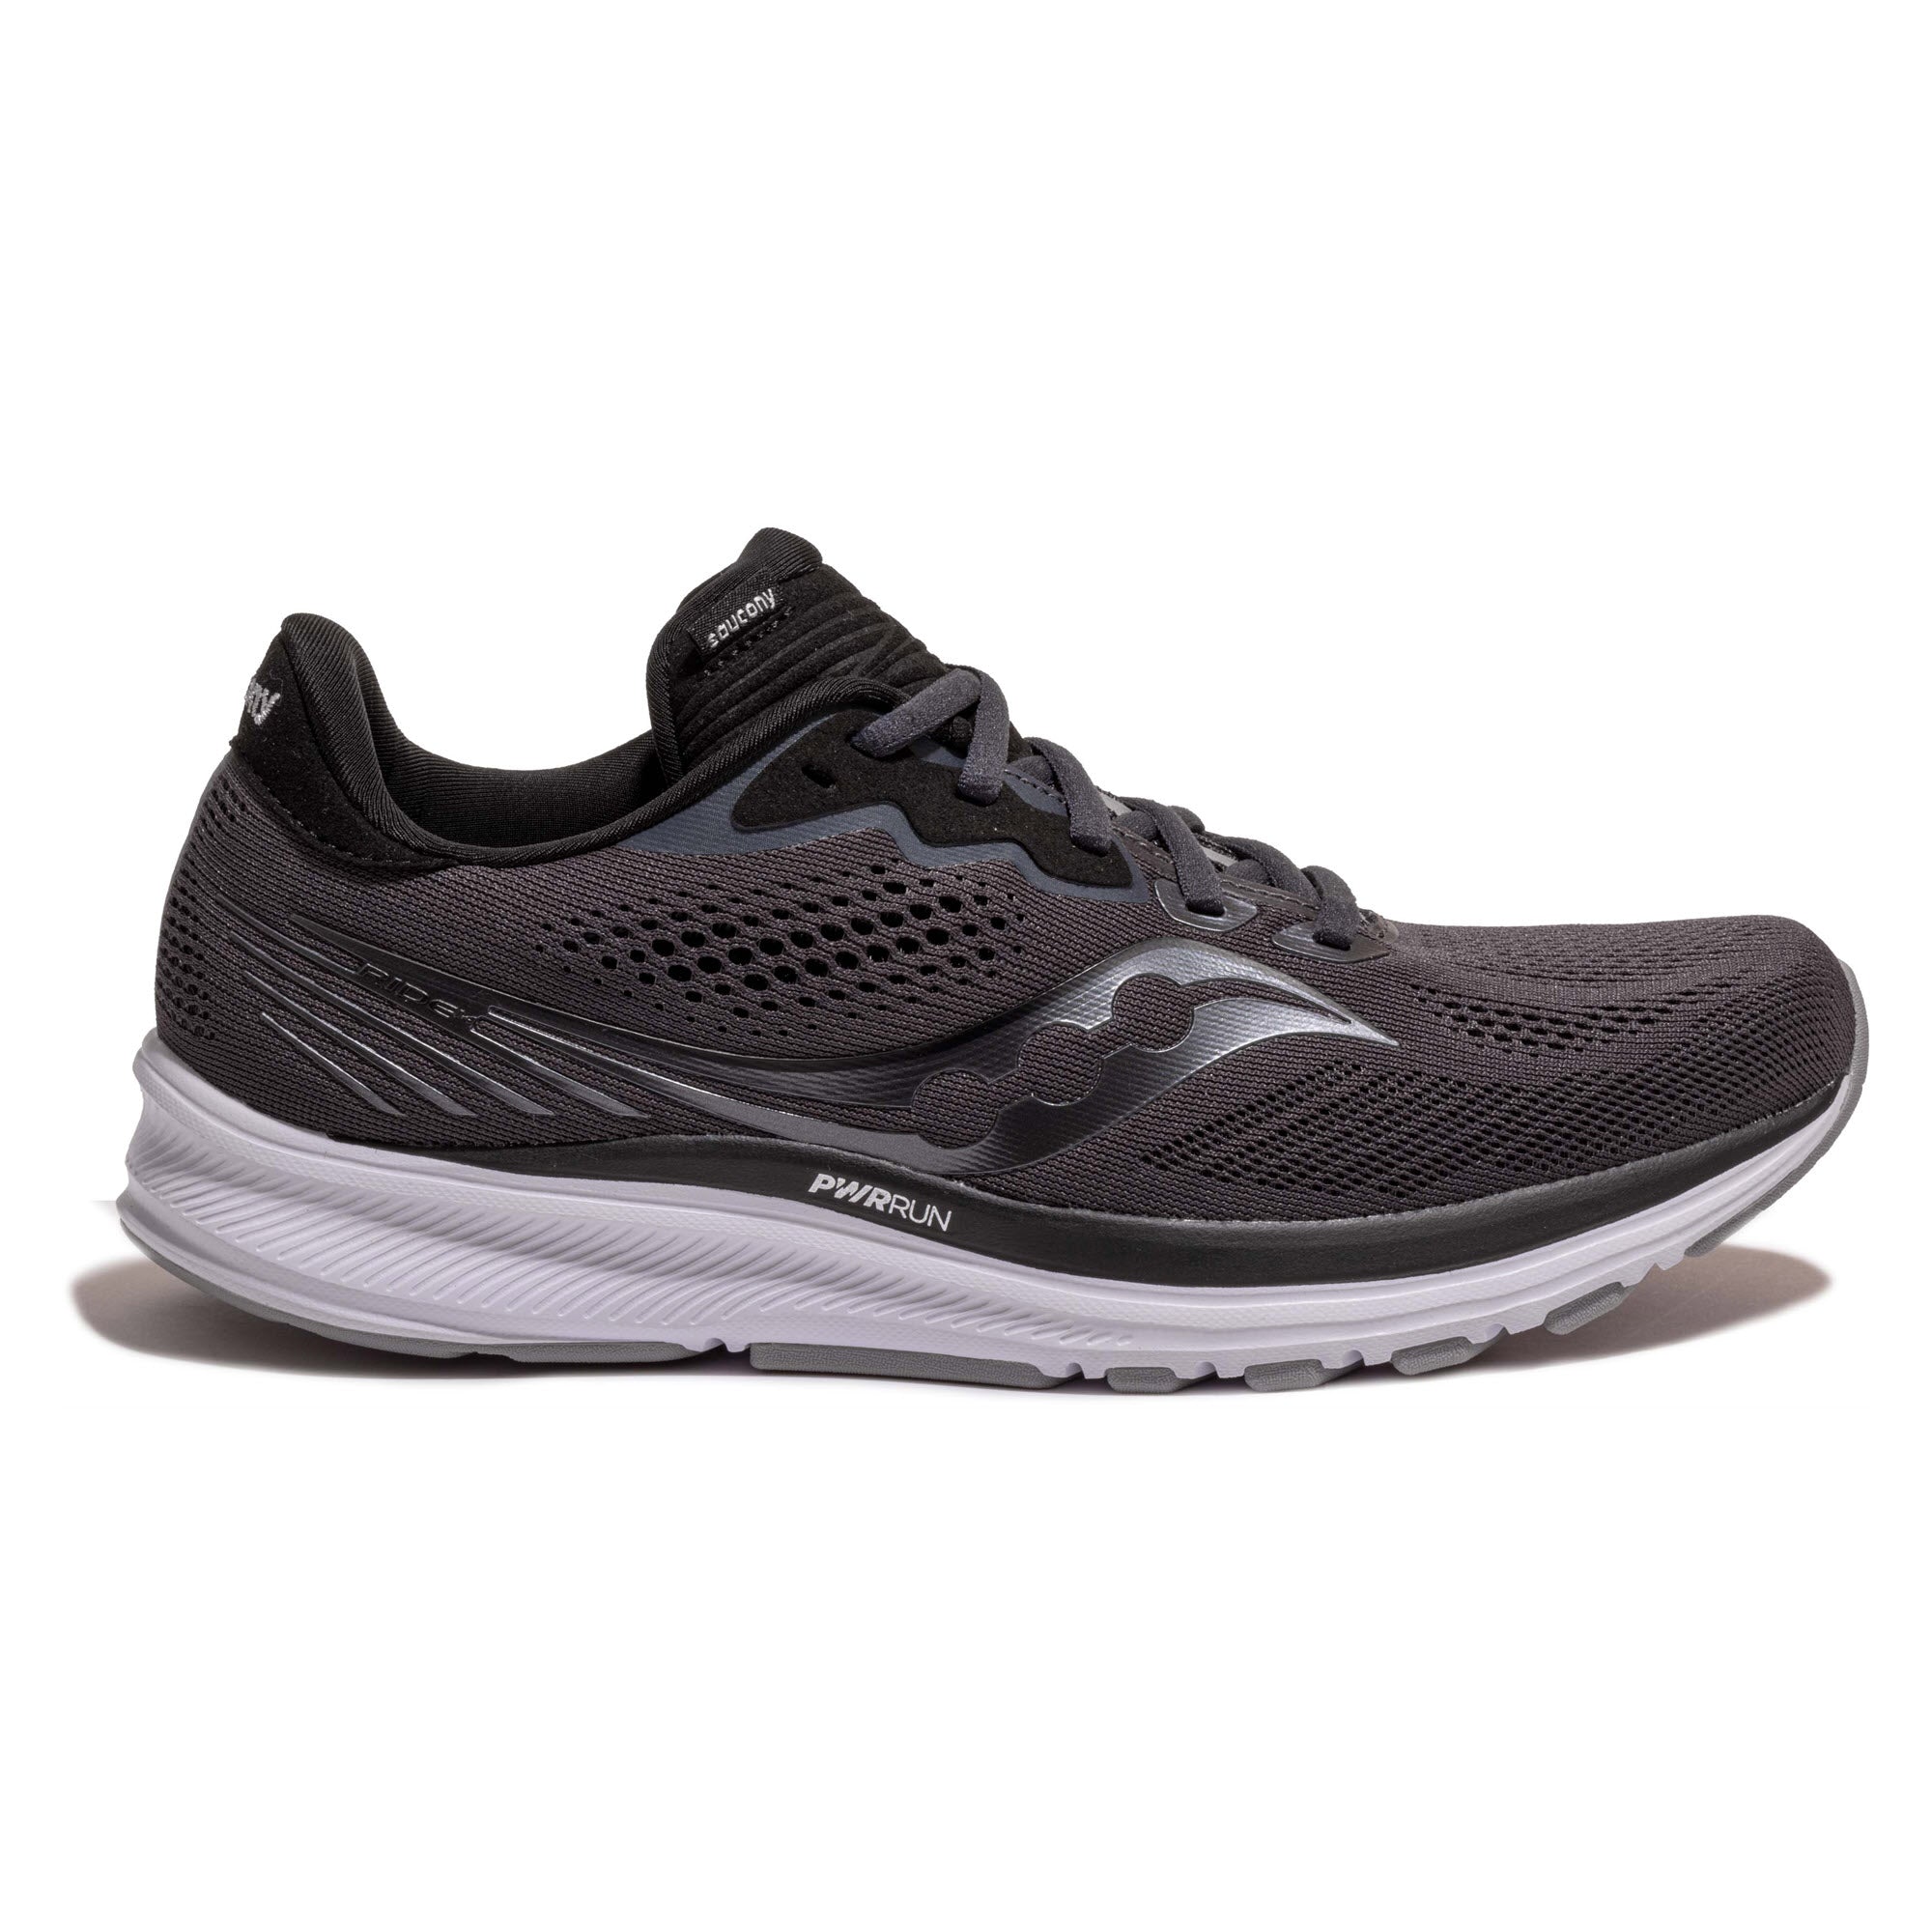 A single black Saucony Ride 14 Charcoal / Black running shoe with PWRRUN cushioning and a white sole on a white background.